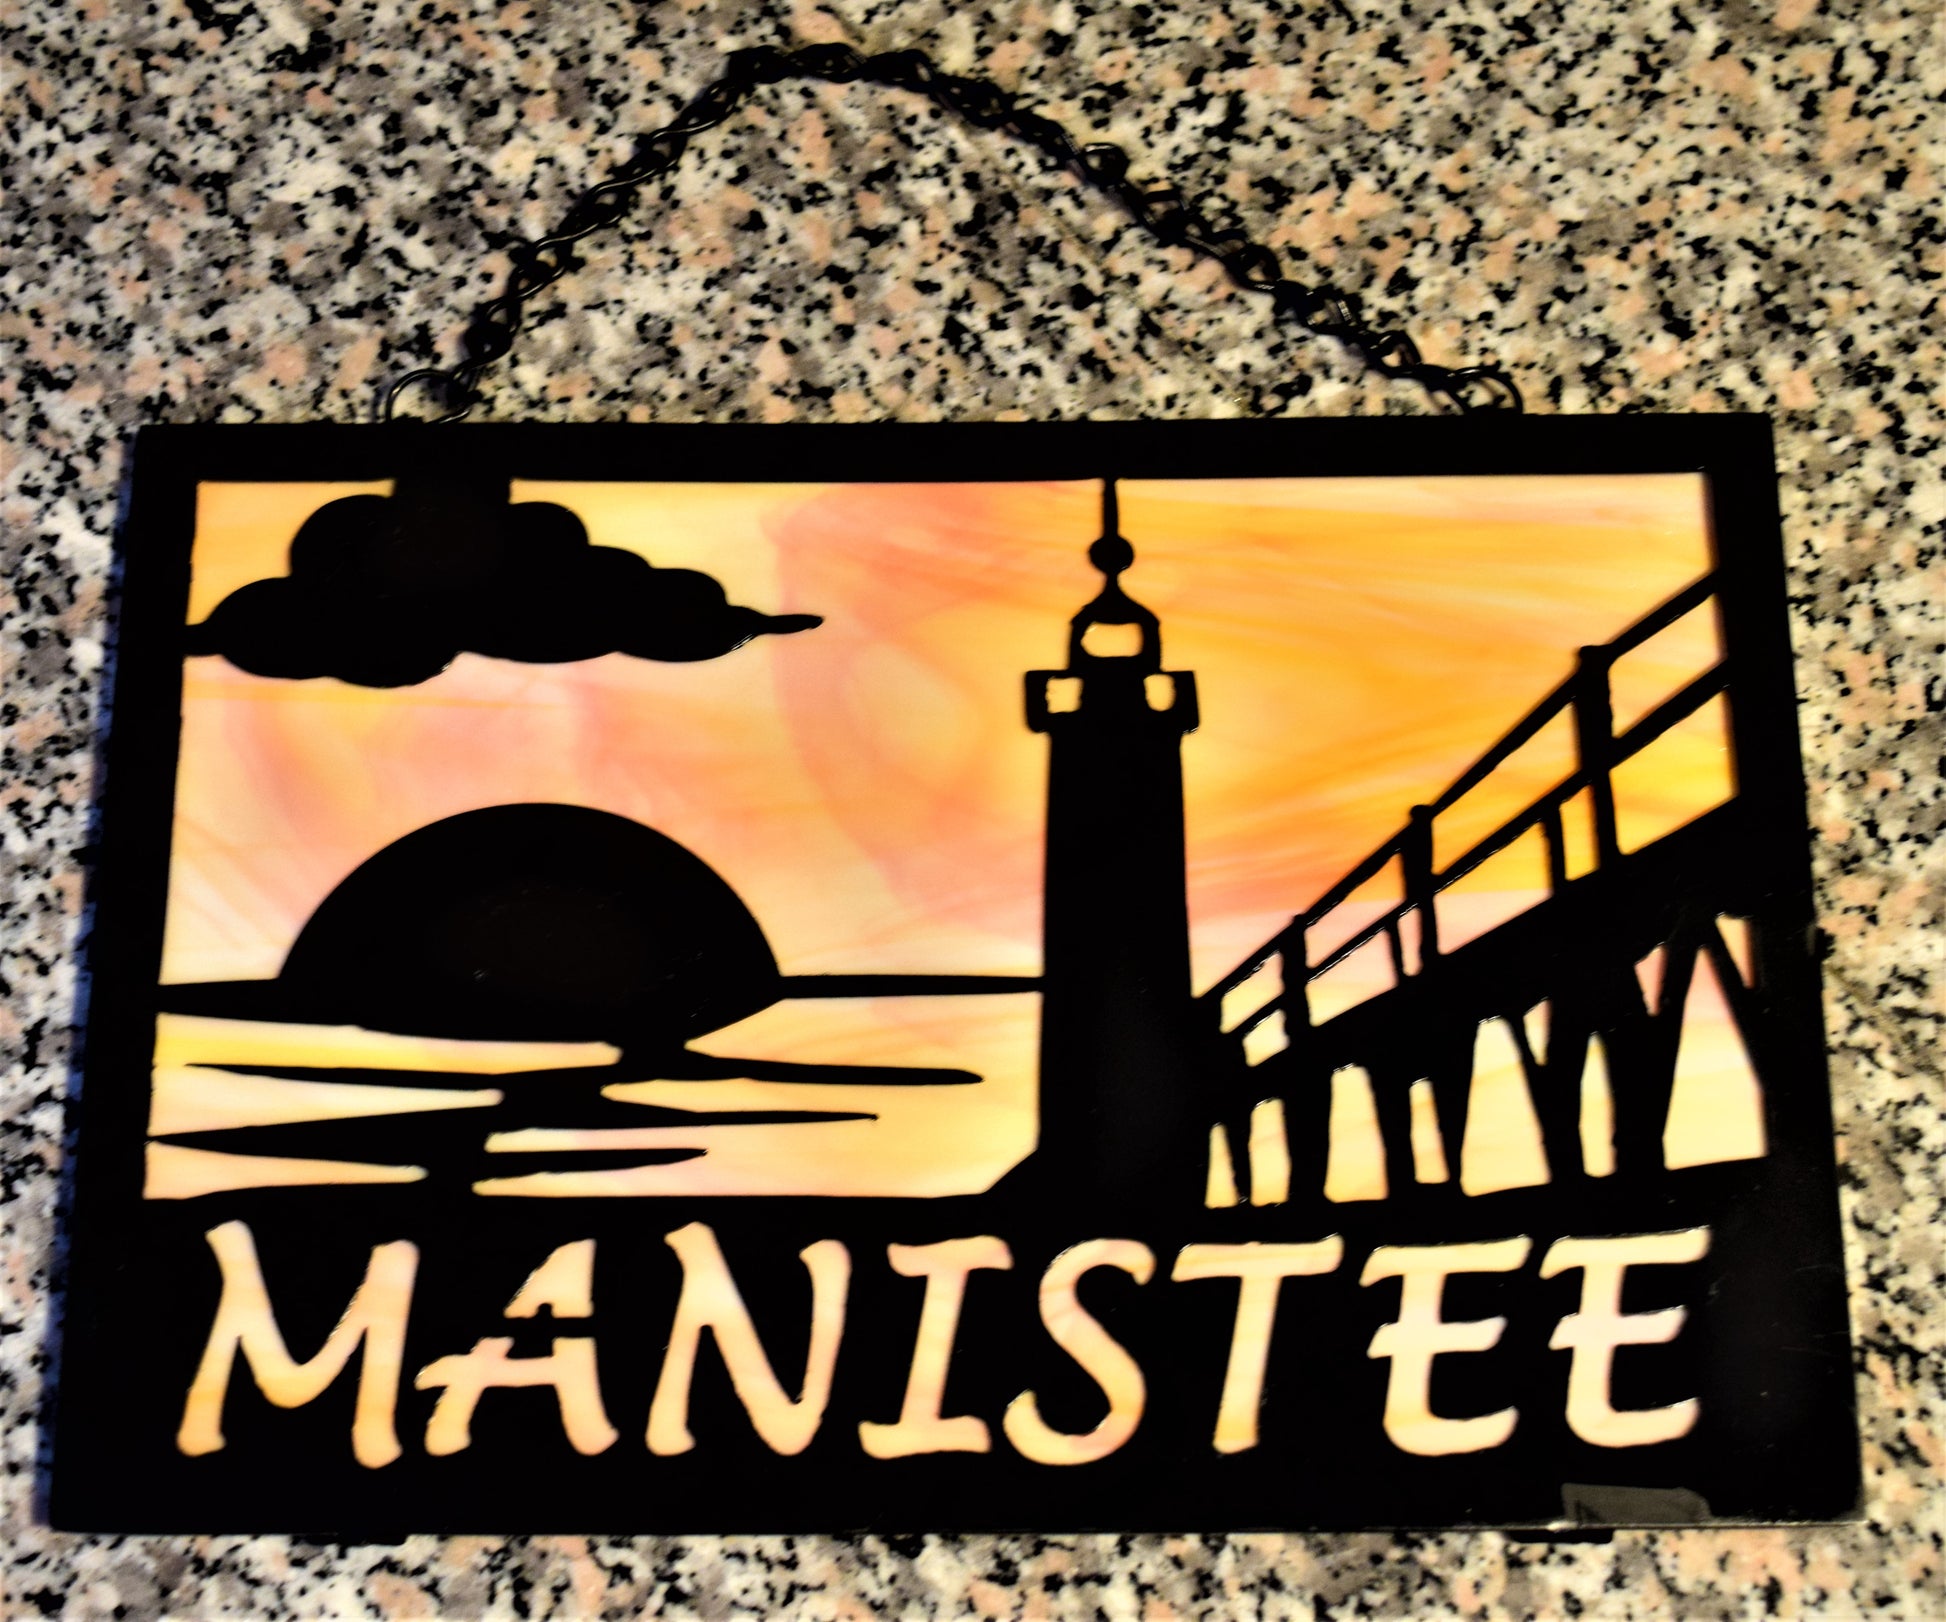 Black custom metal featuring Manistee Michigan lighthouse with cloud and sunset. Manistee spelled out beneath lighthouse image. With Orange and yellow behind metal. 